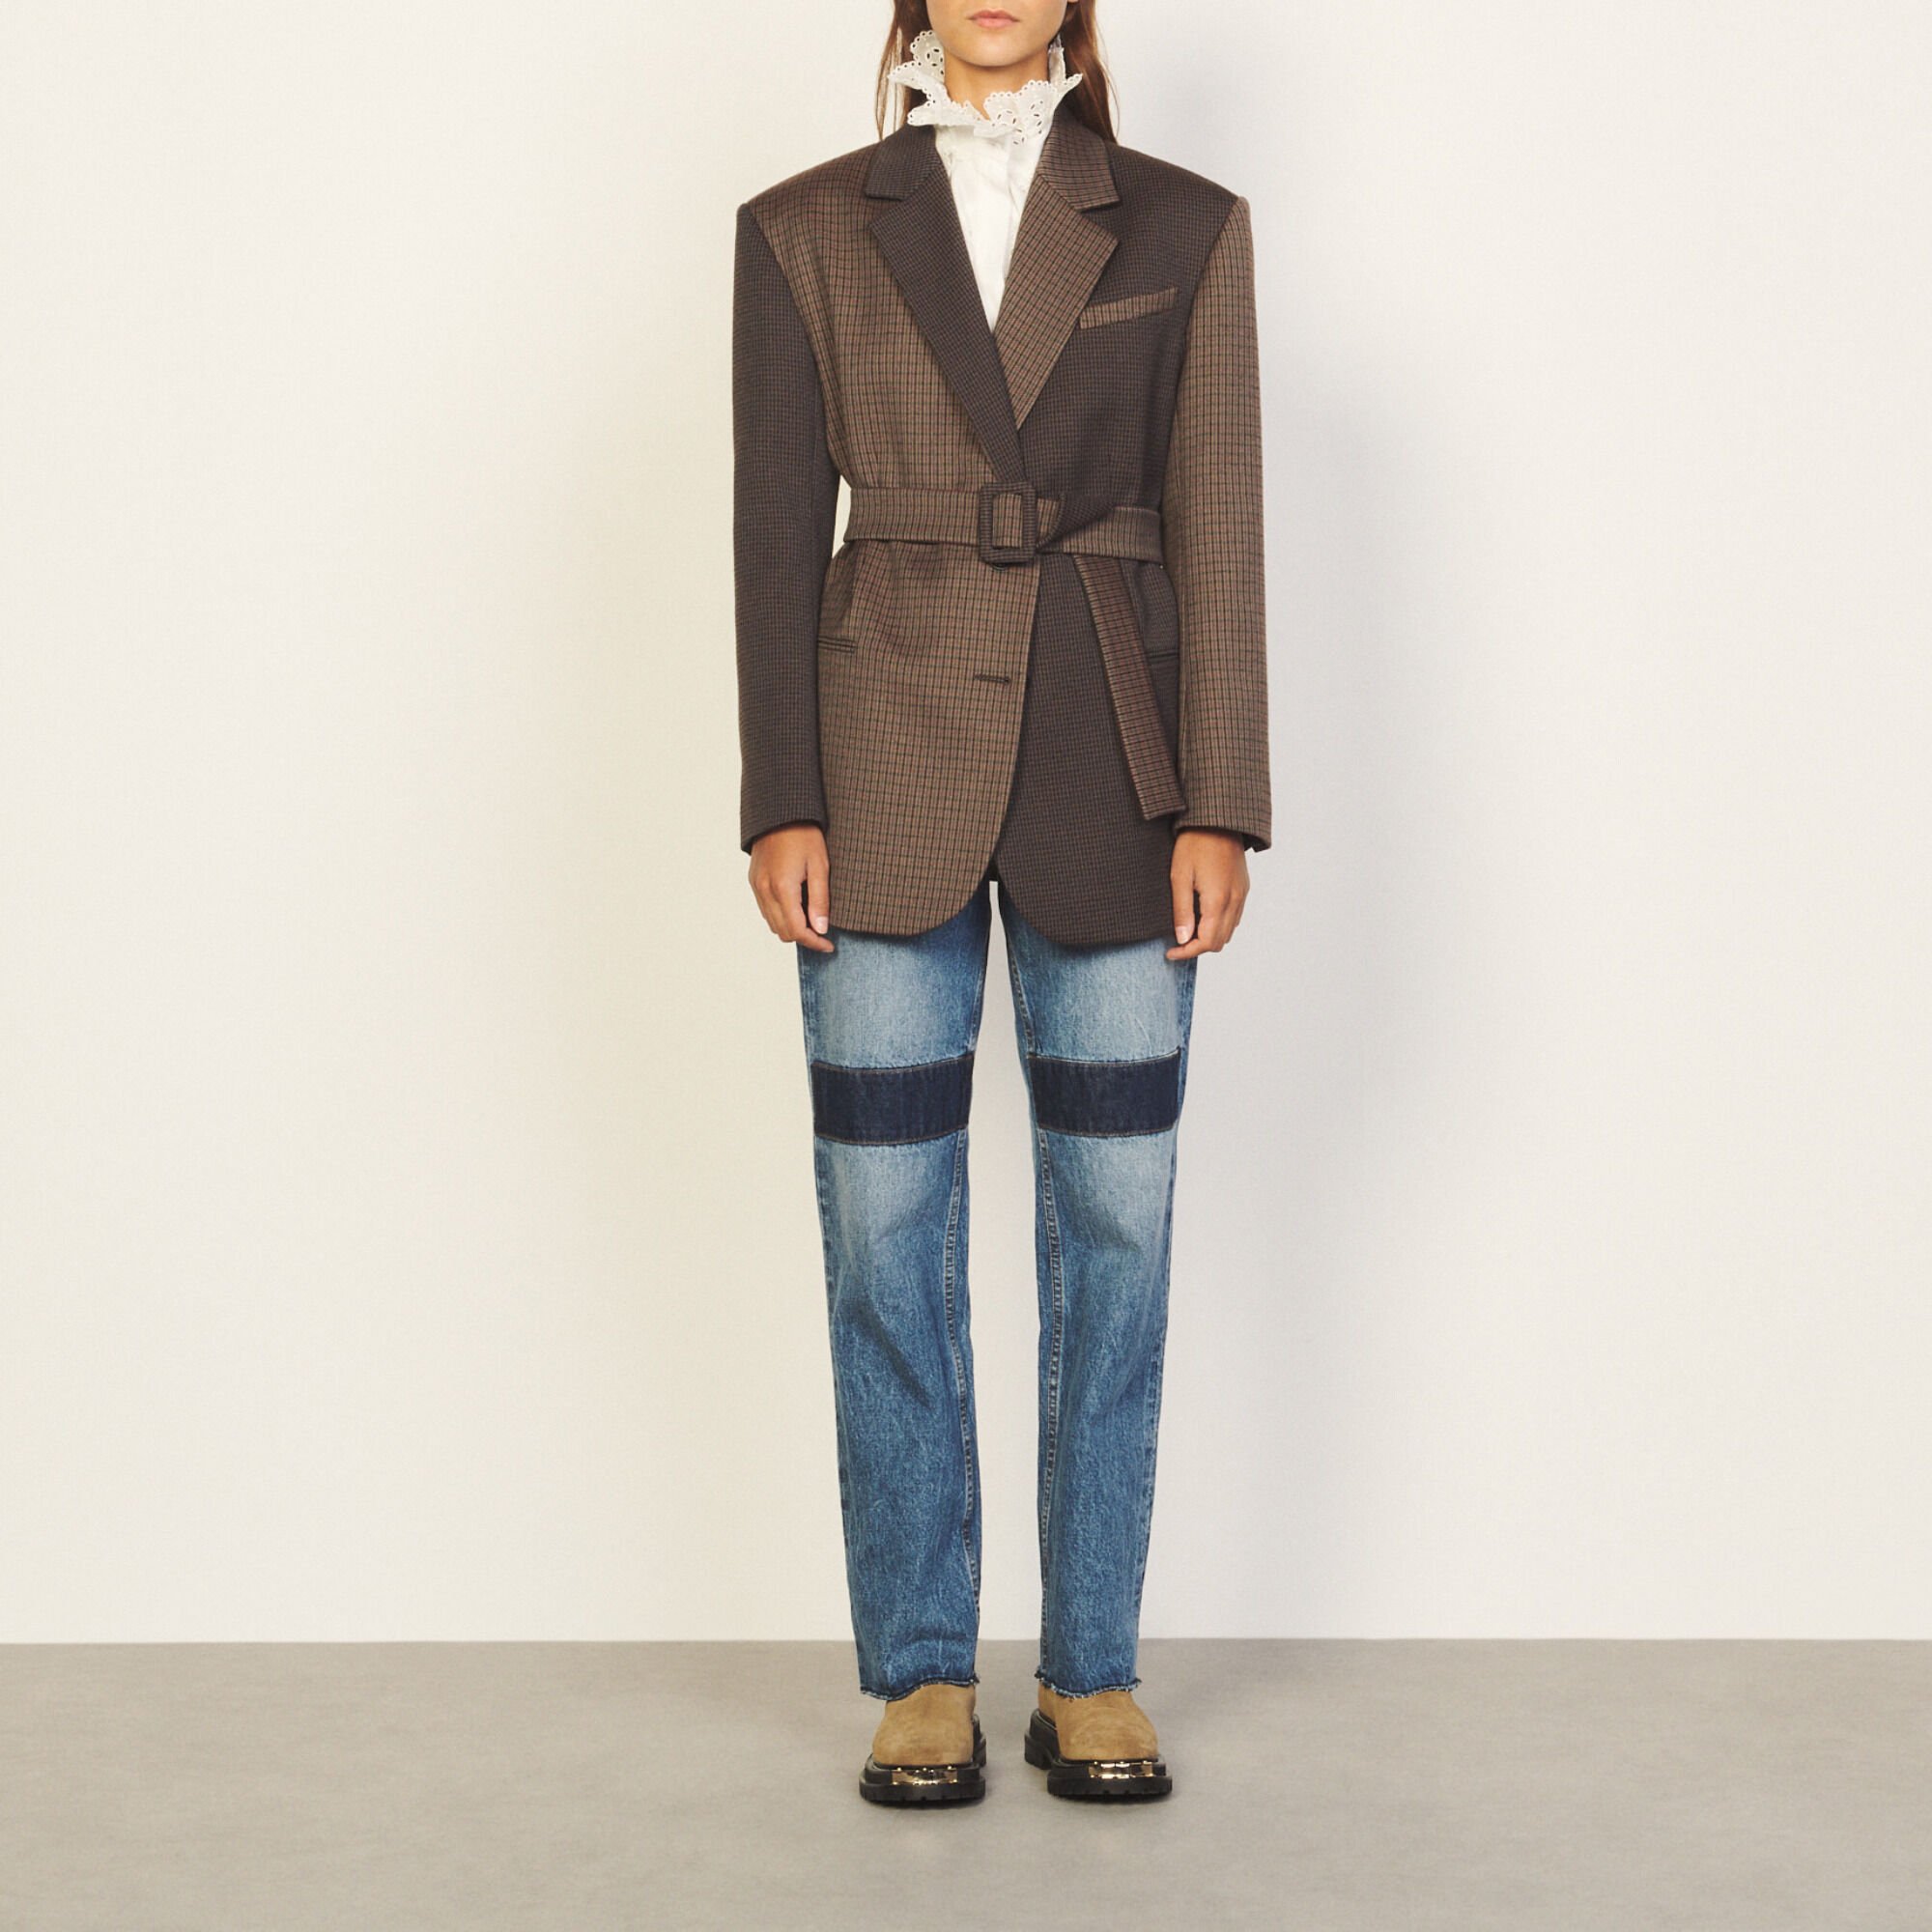 Dual-fabric tailored jacket